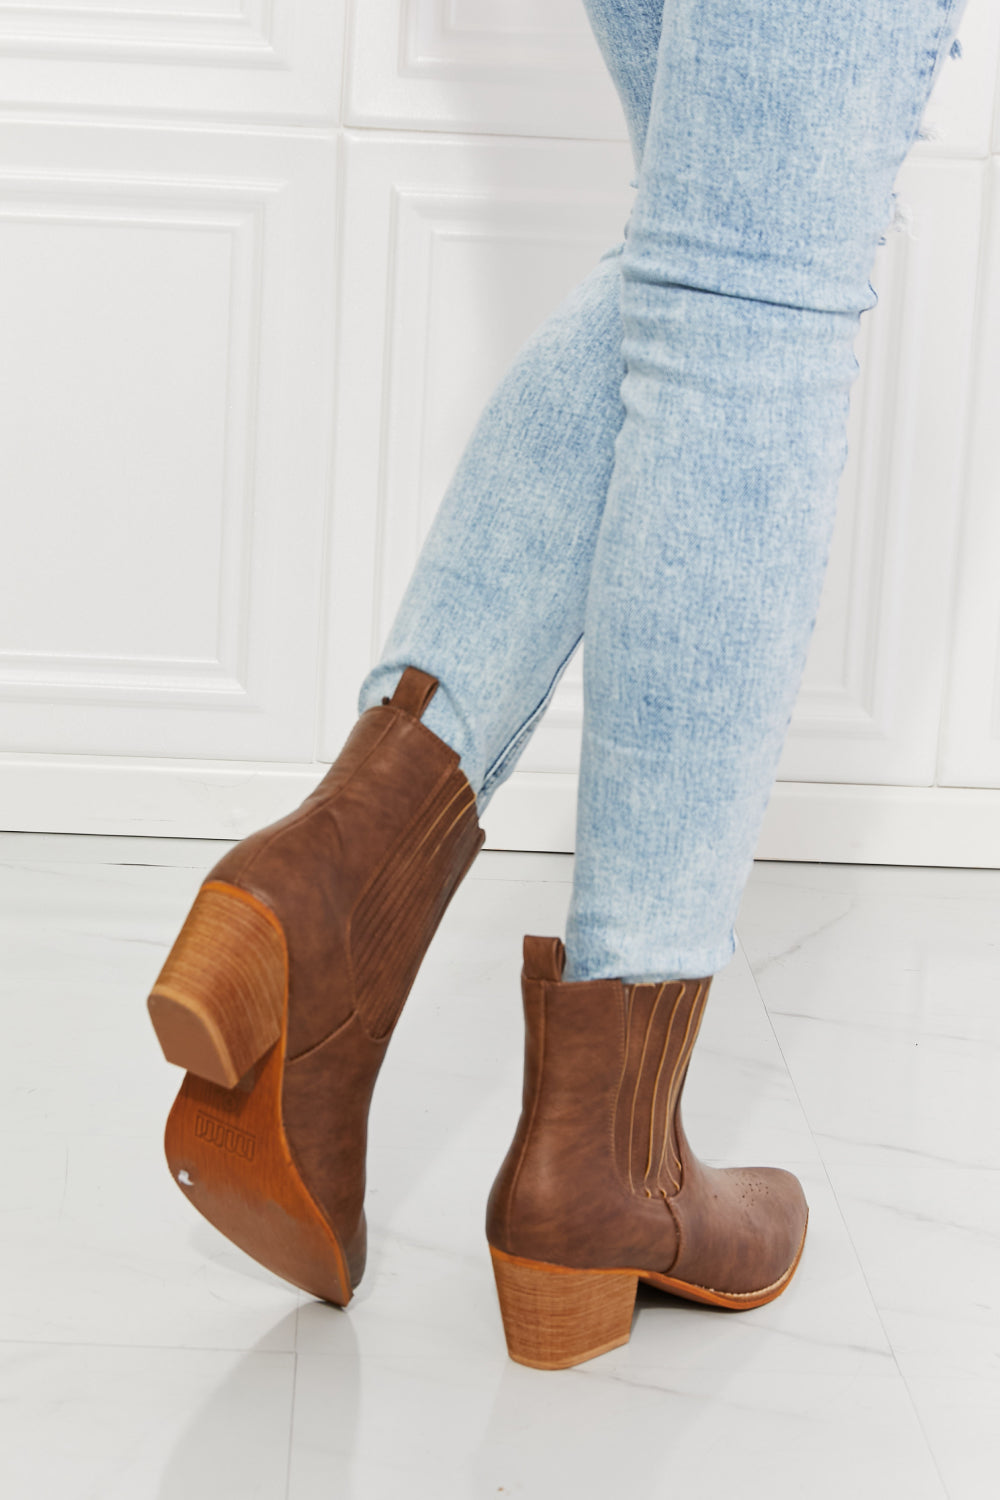 MMShoes Love the Journey Stacked Heel Chelsea Boot in Chestnut - Luv Lush